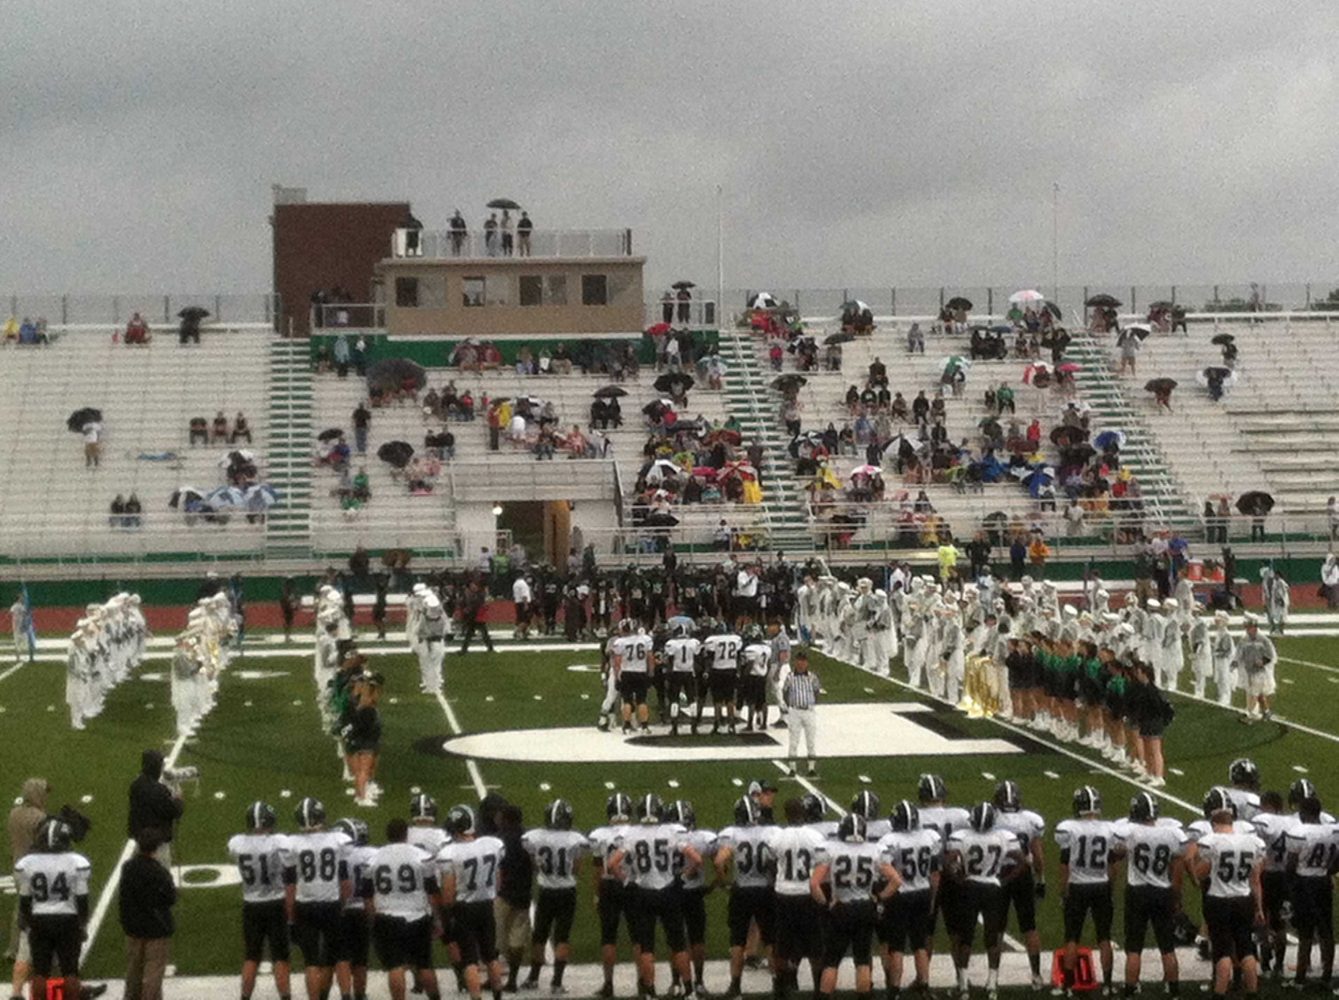 The Pattonville football team kicks off the 2012 season with a new stadium. The Pirates return to the field on Friday, Aug. 30 against Kirkwood to begin the 2013 campaign.